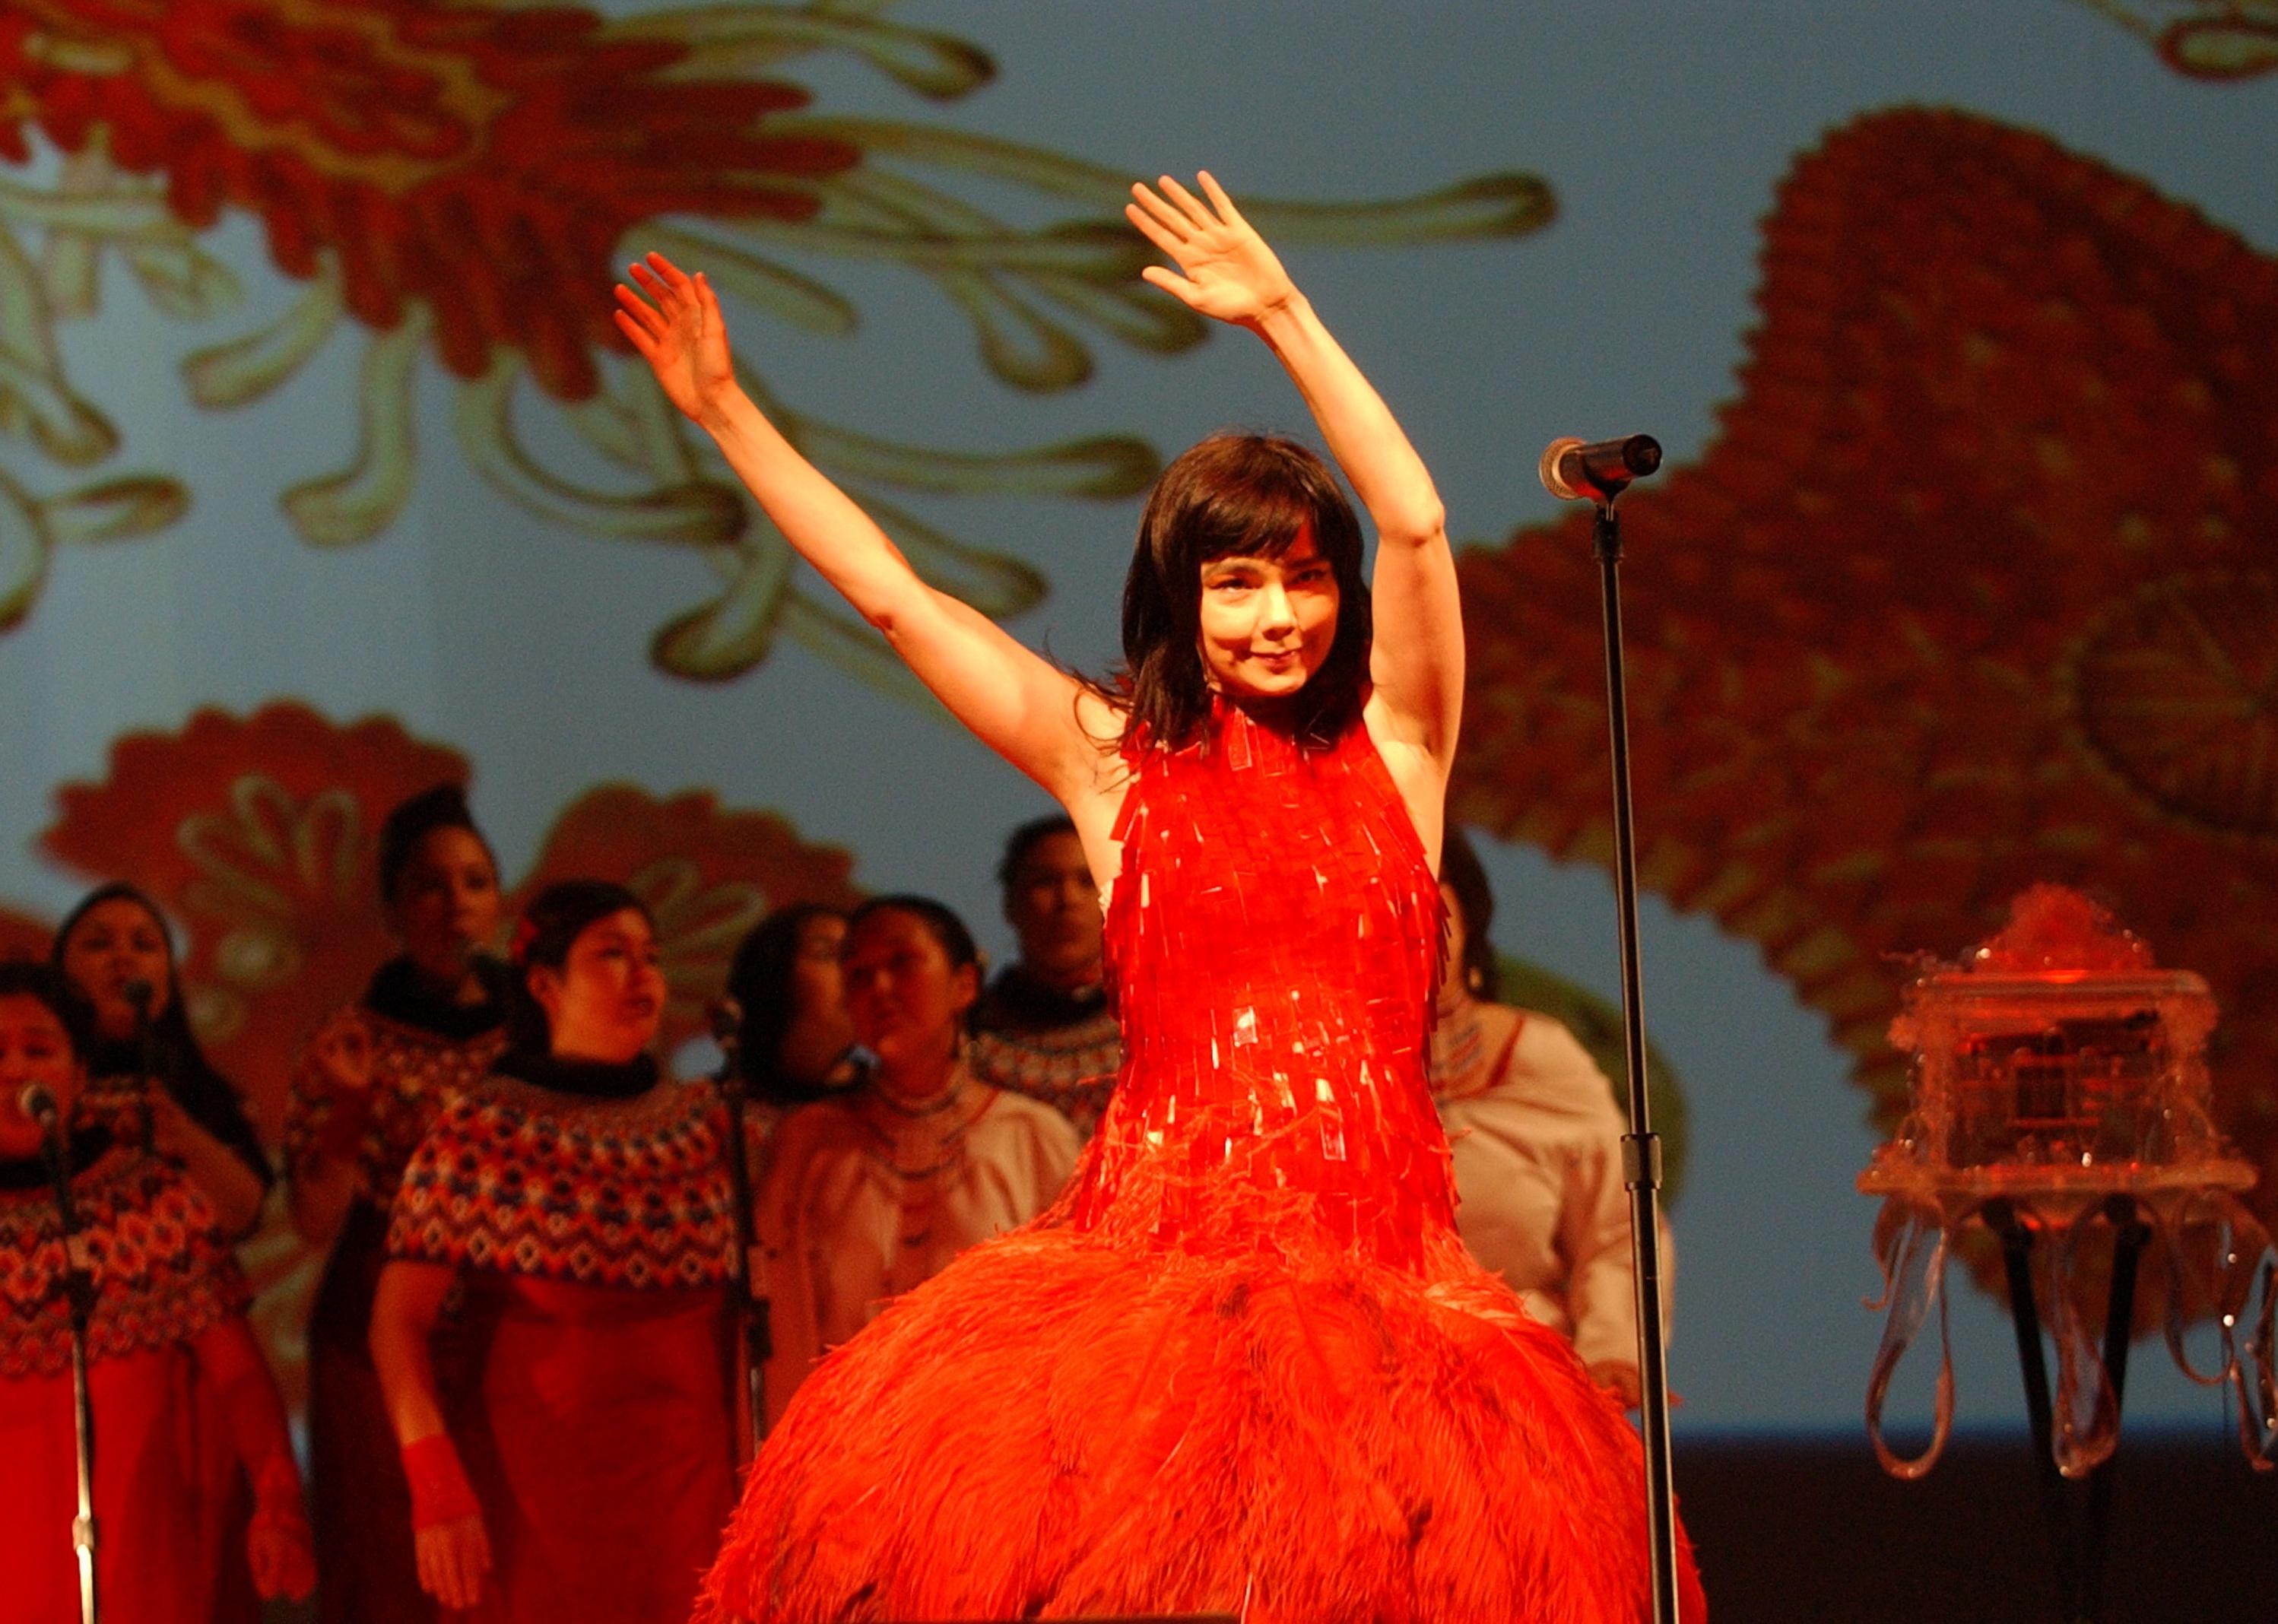 Bjork performs in a red dress onstage